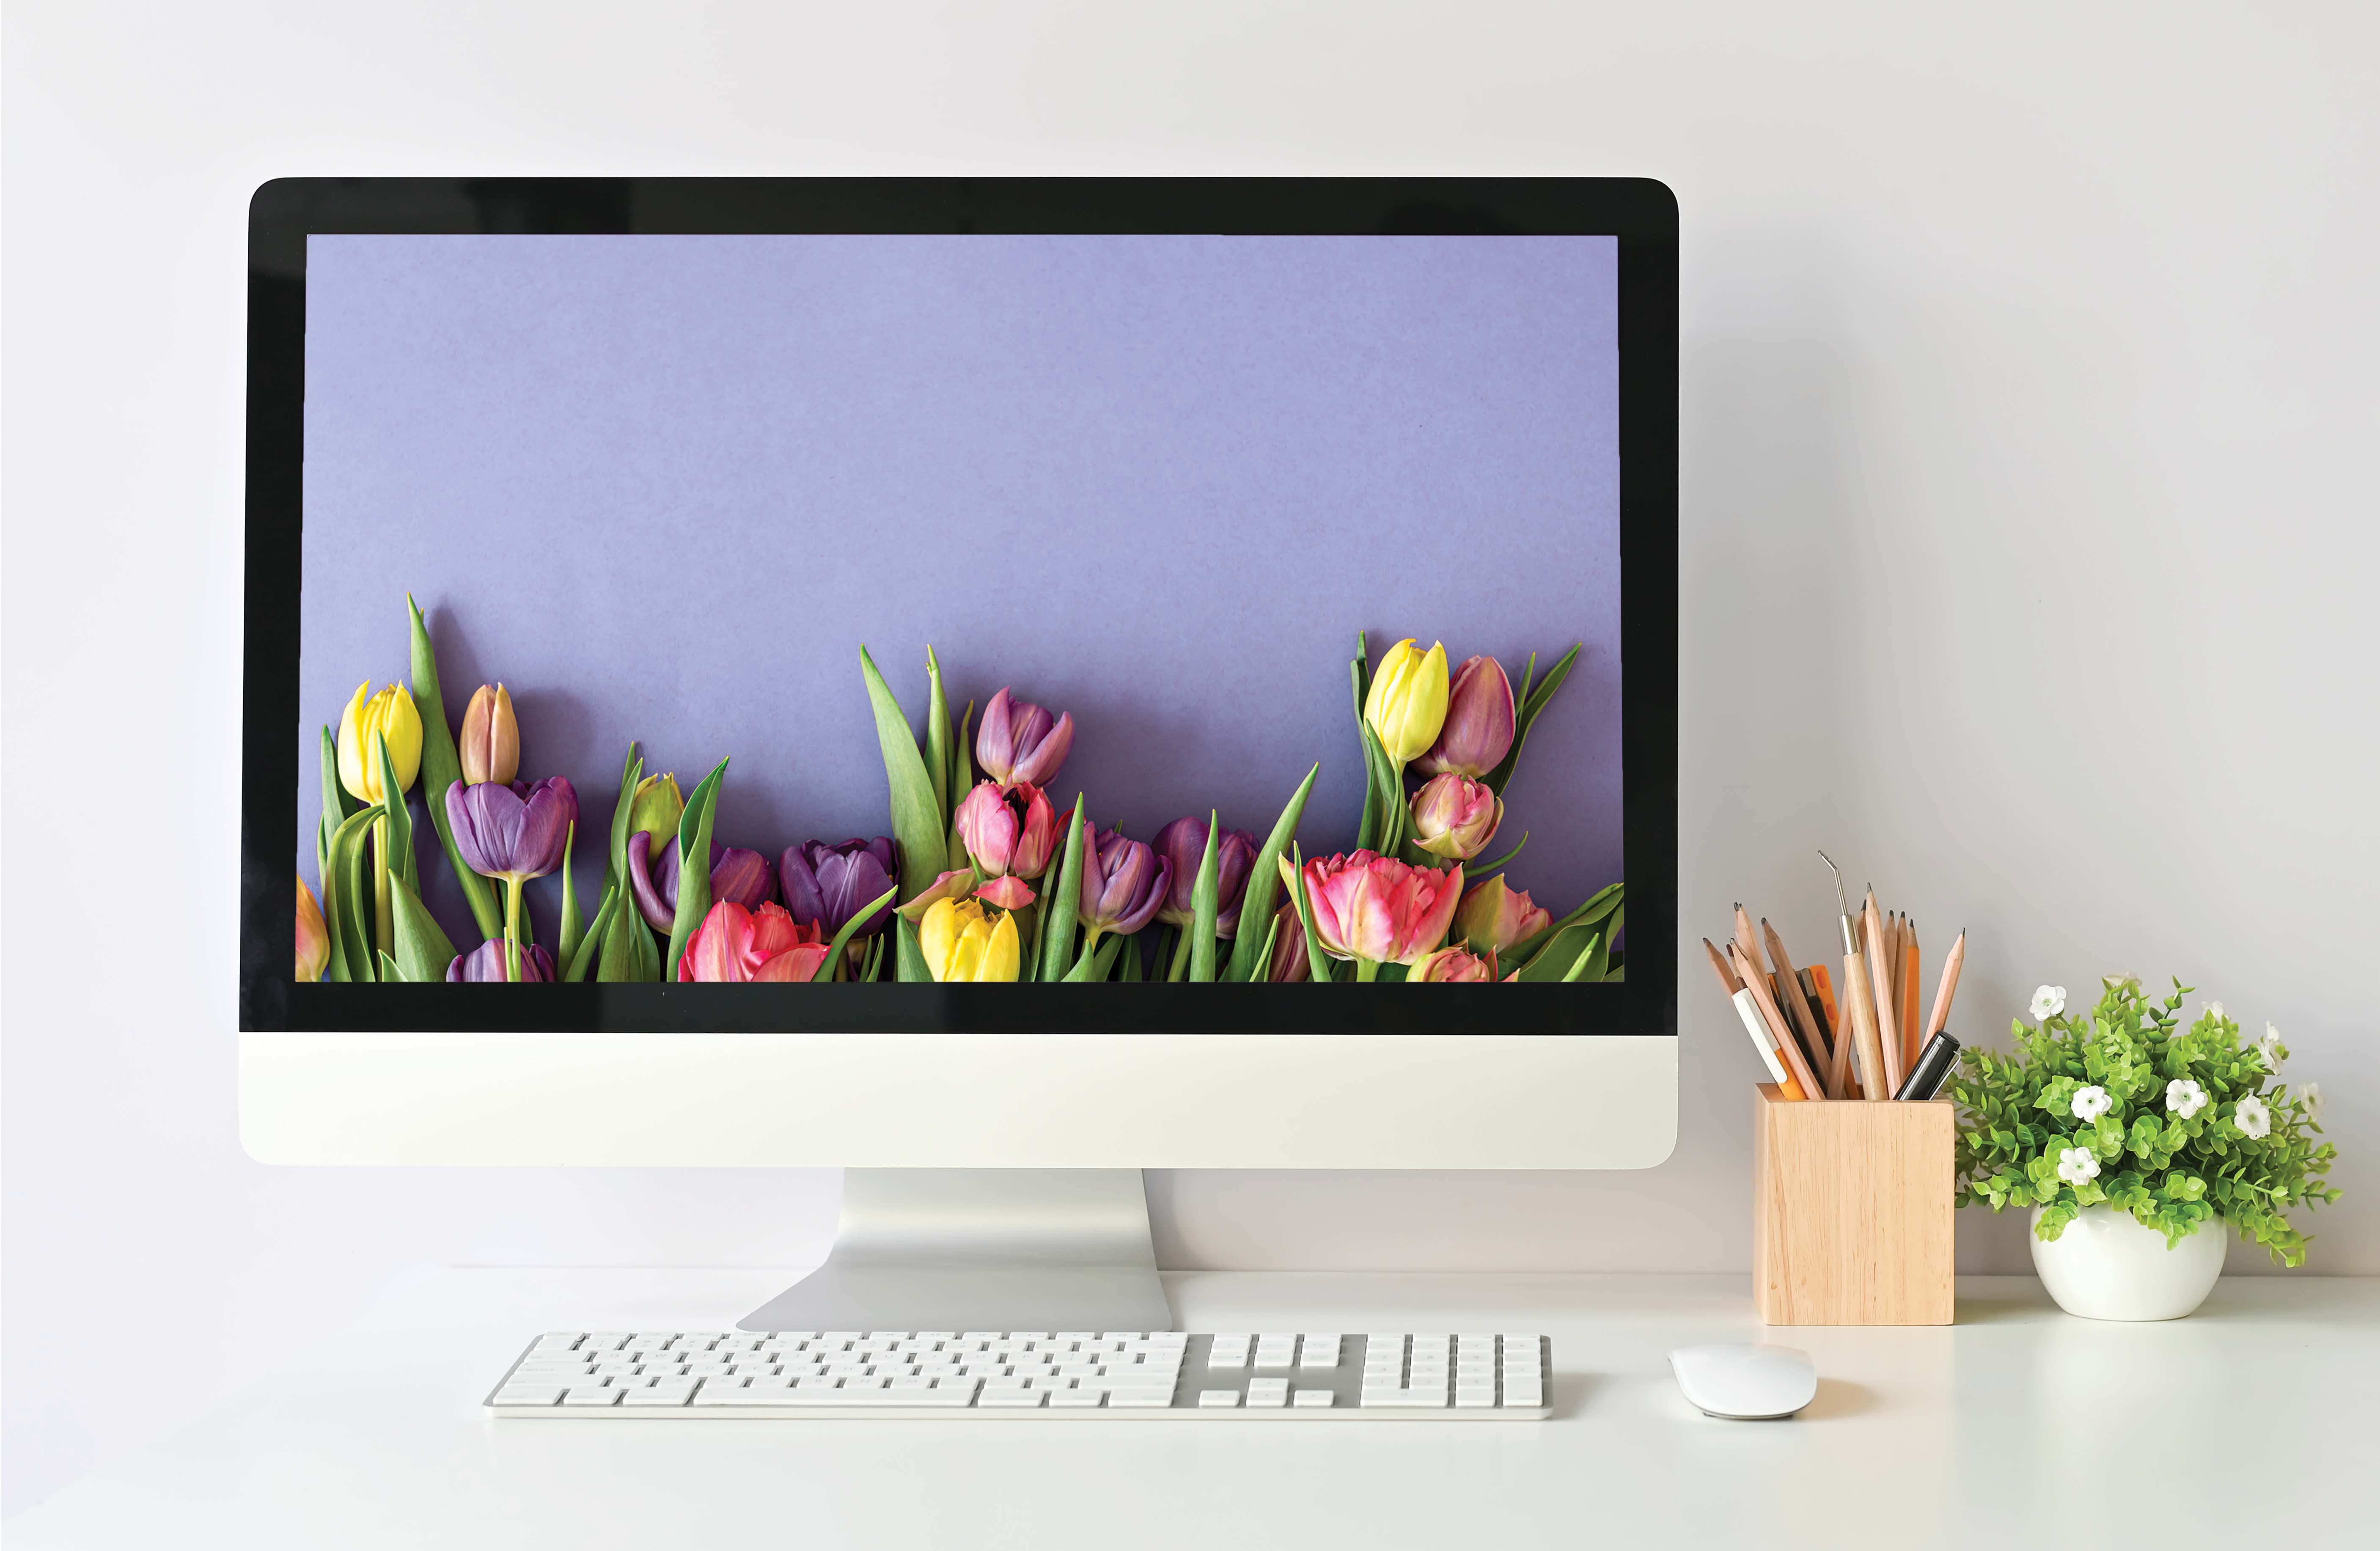 Online Education Directory for Florists